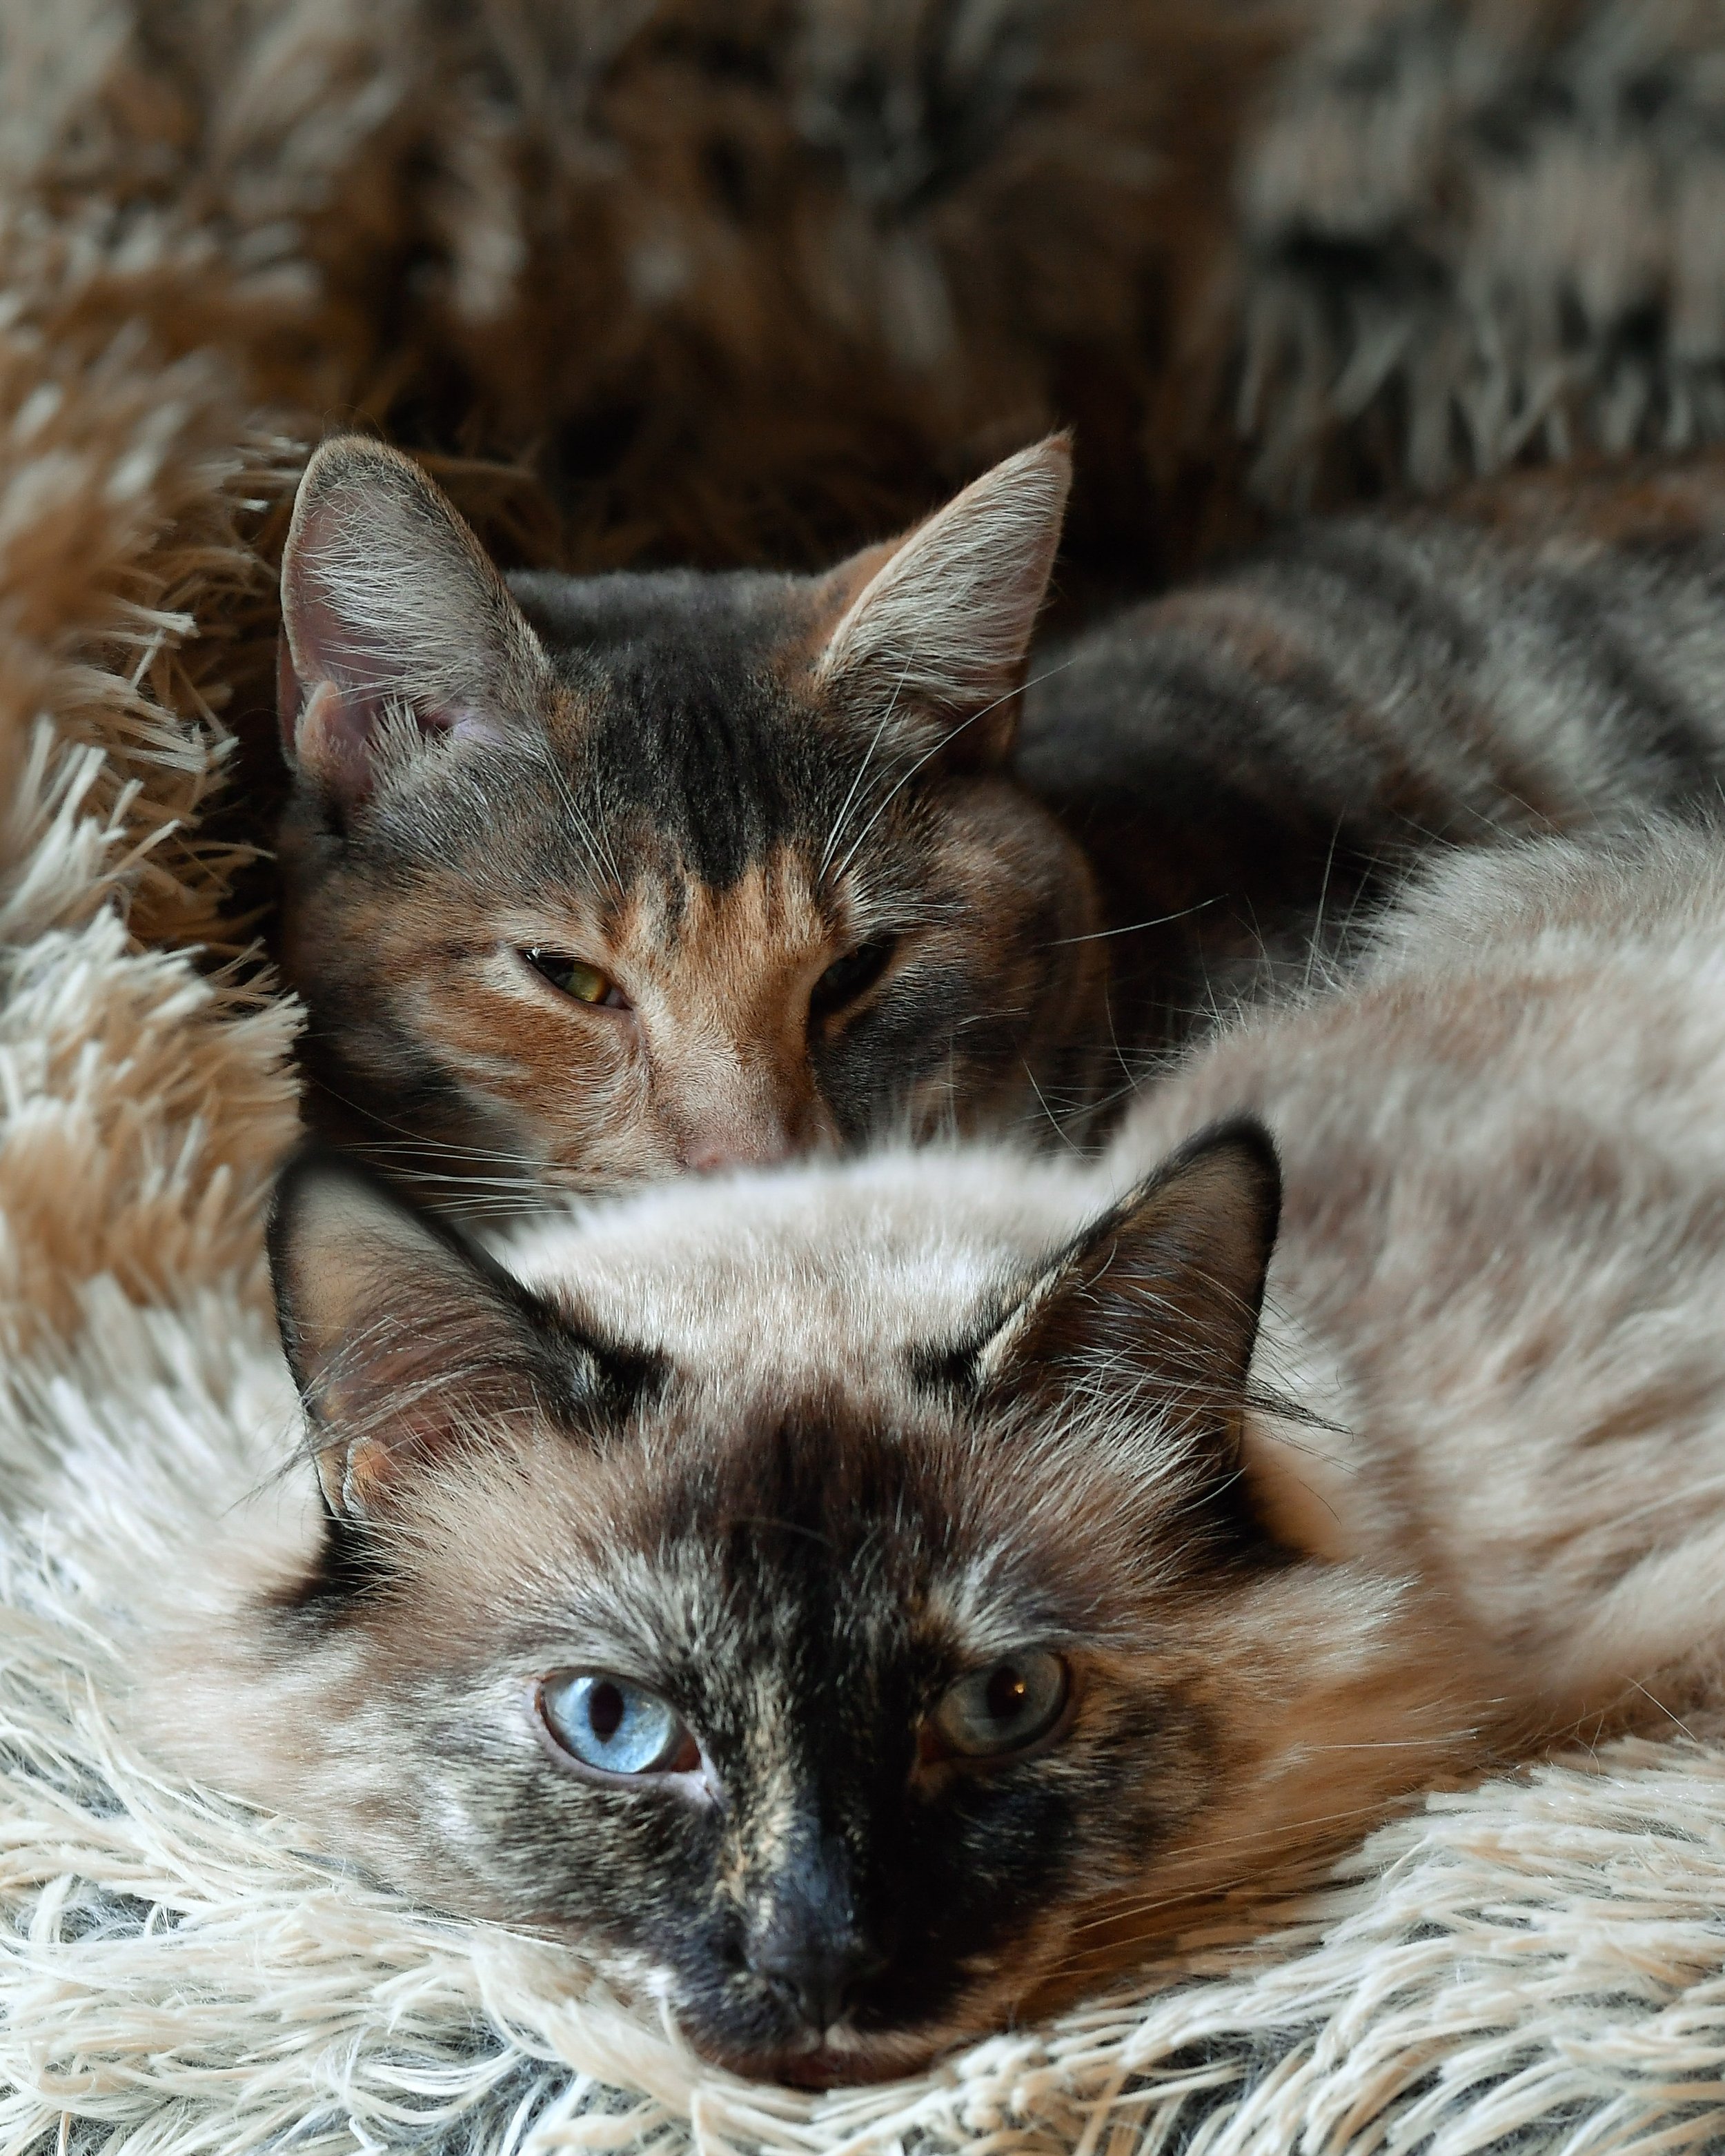 Luna and Amore in the kitty bedwebsite.jpg